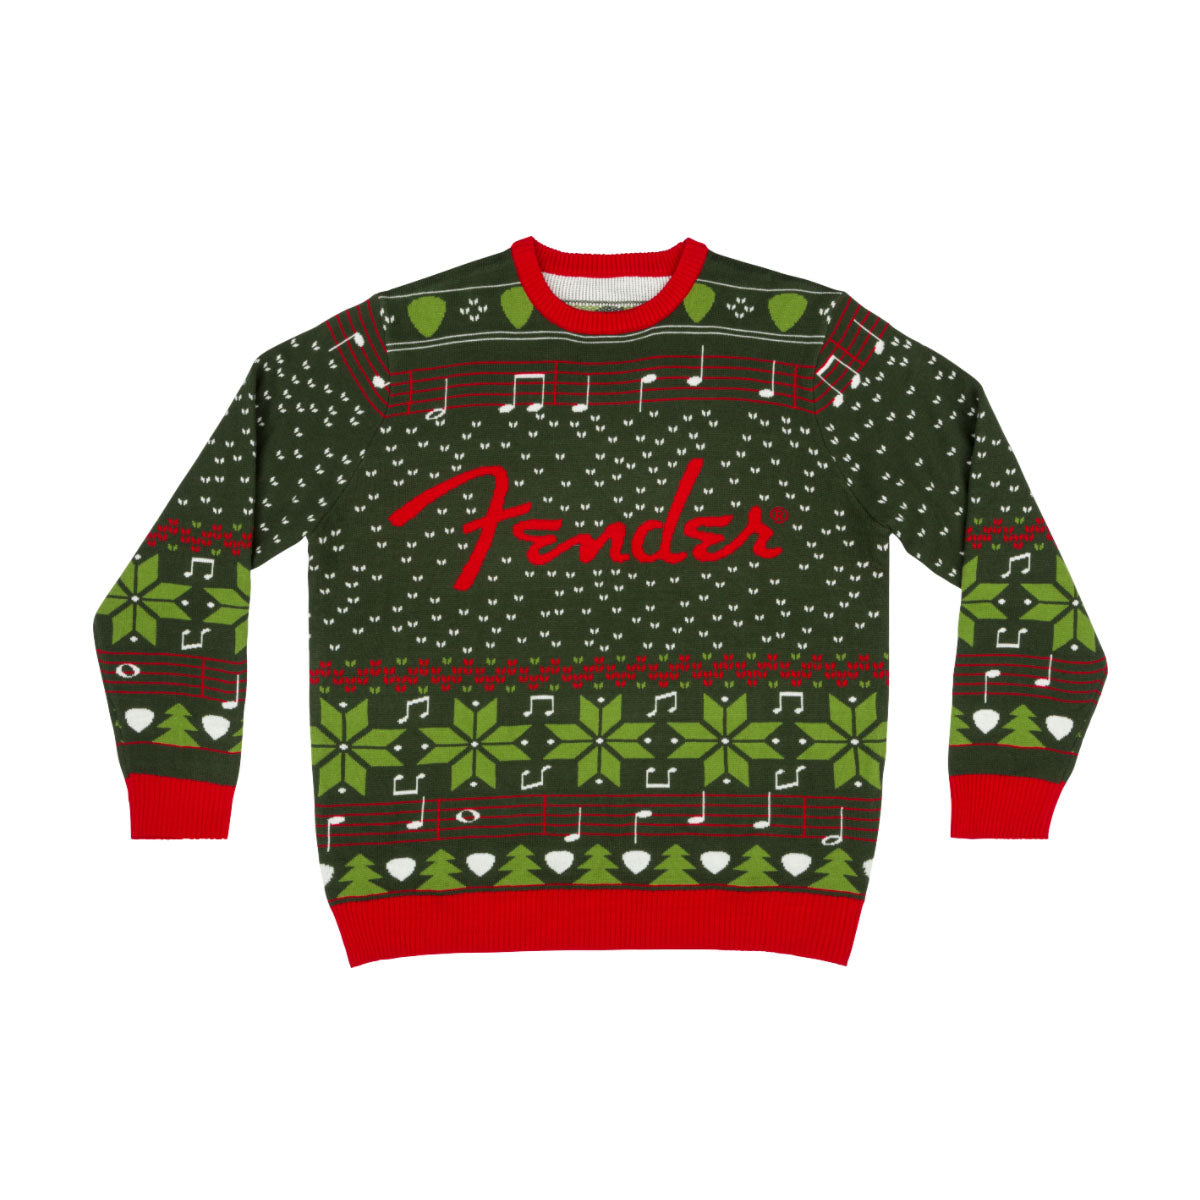 Fender 2020 Ugly Christmas Sweater L Large - 9190174506